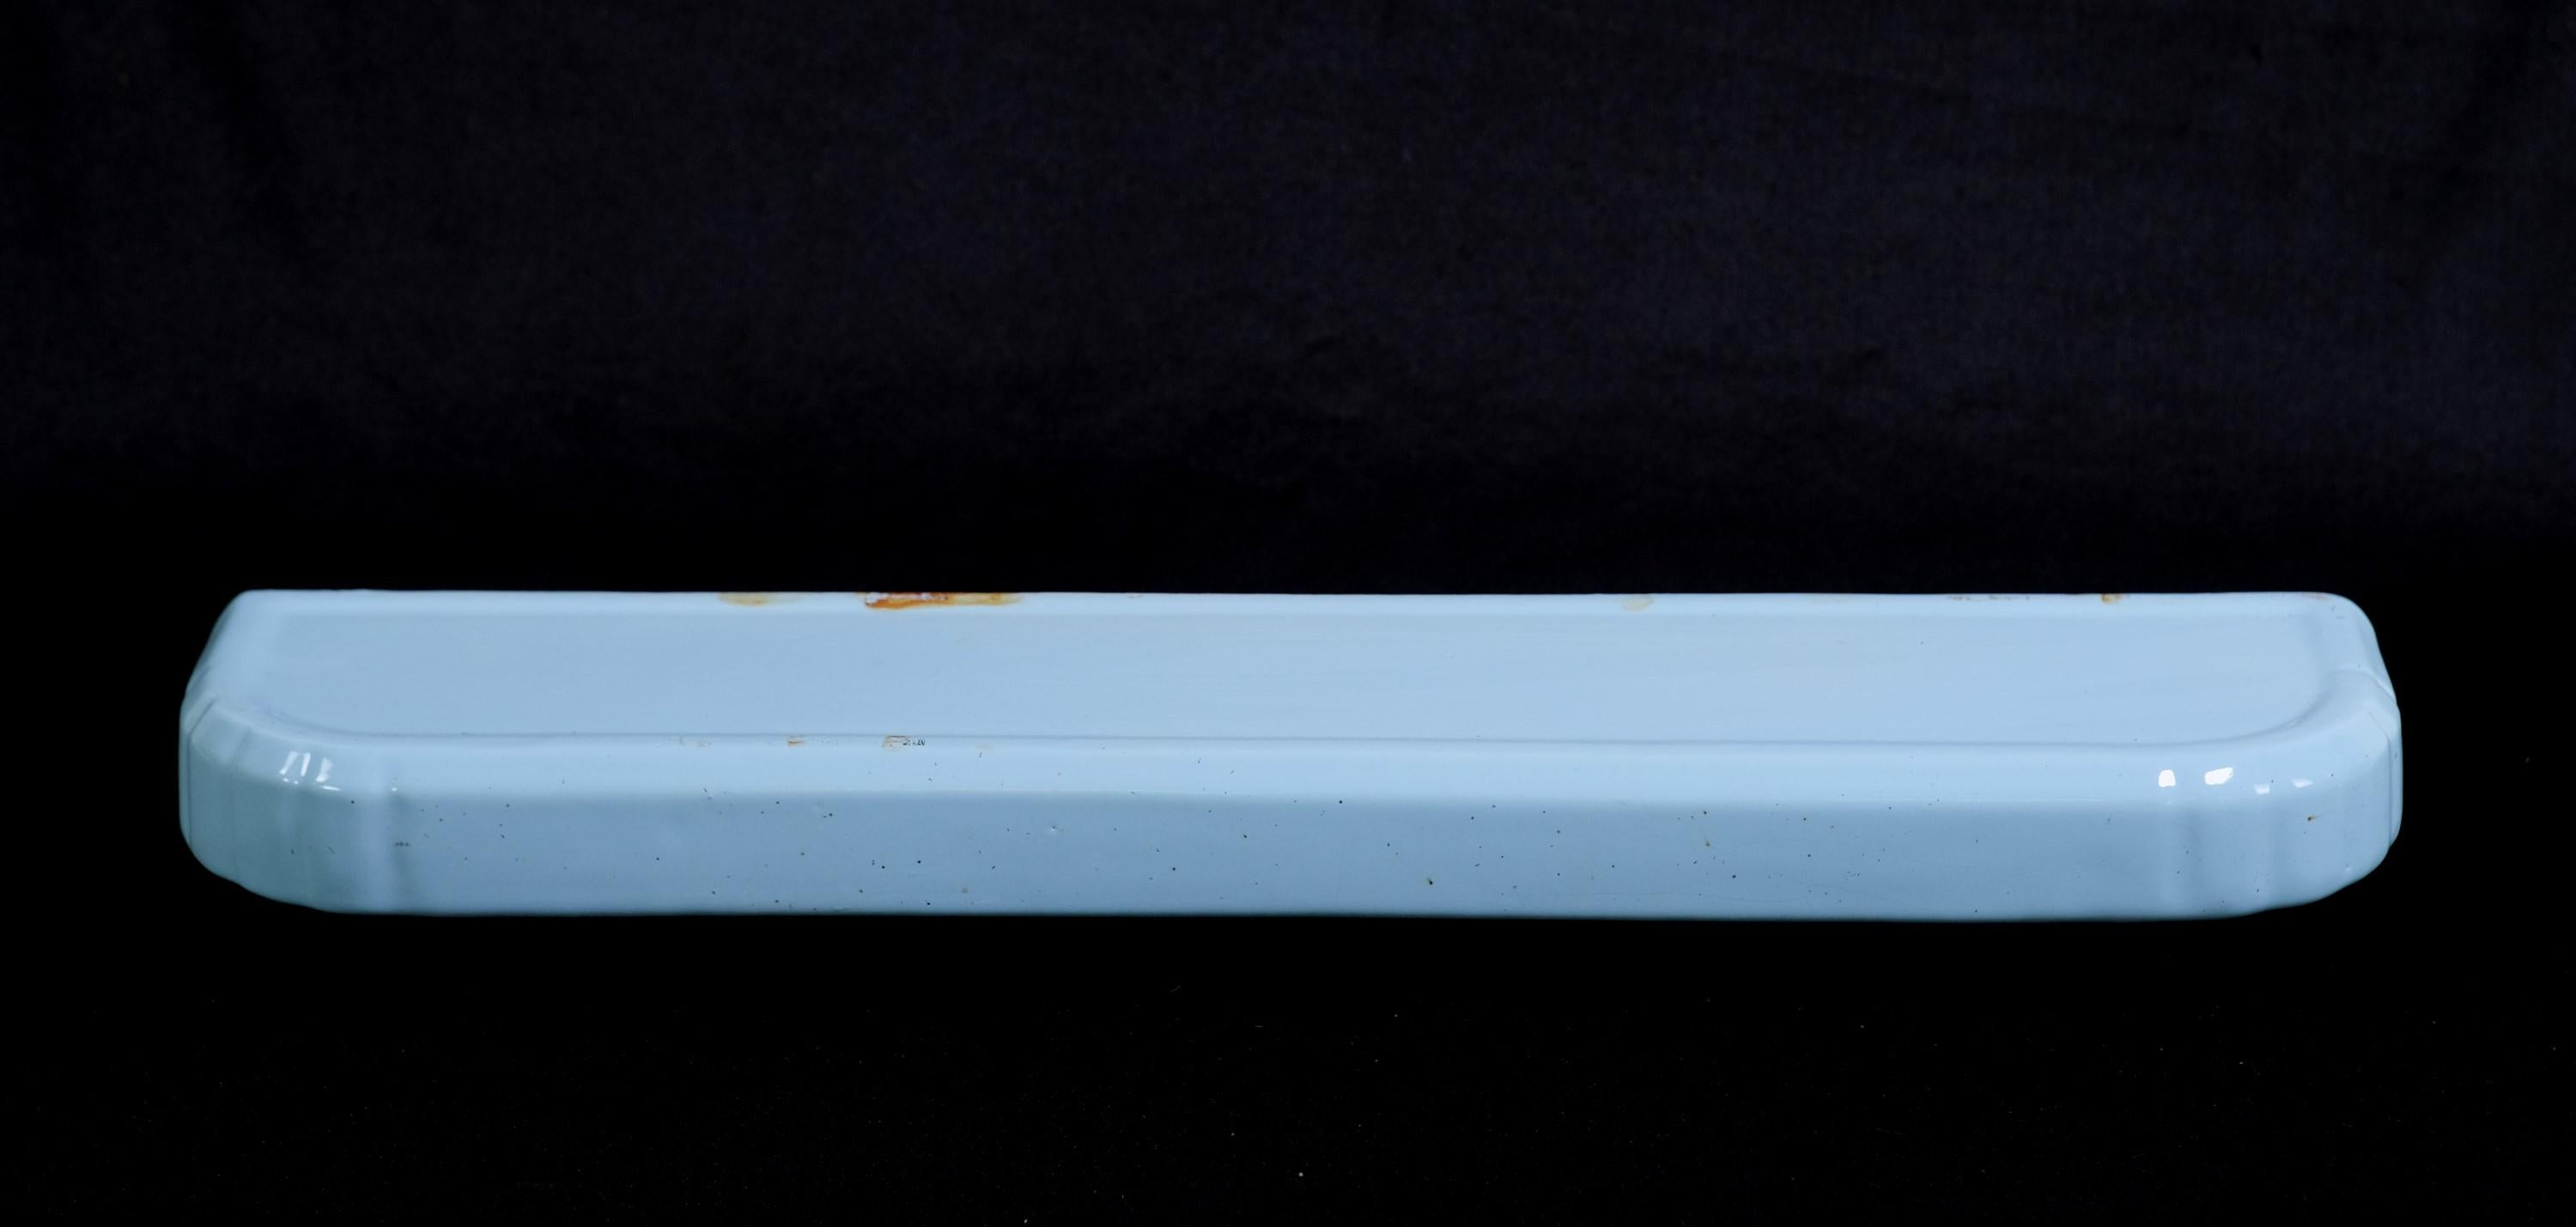 20th century French light blue porcelain wall mount bathroom shelf for towels or whatnot. Mounted with two holes in underneath supports. There are some small black spots showing damage to the glazing. Please see images. Please note, this item is